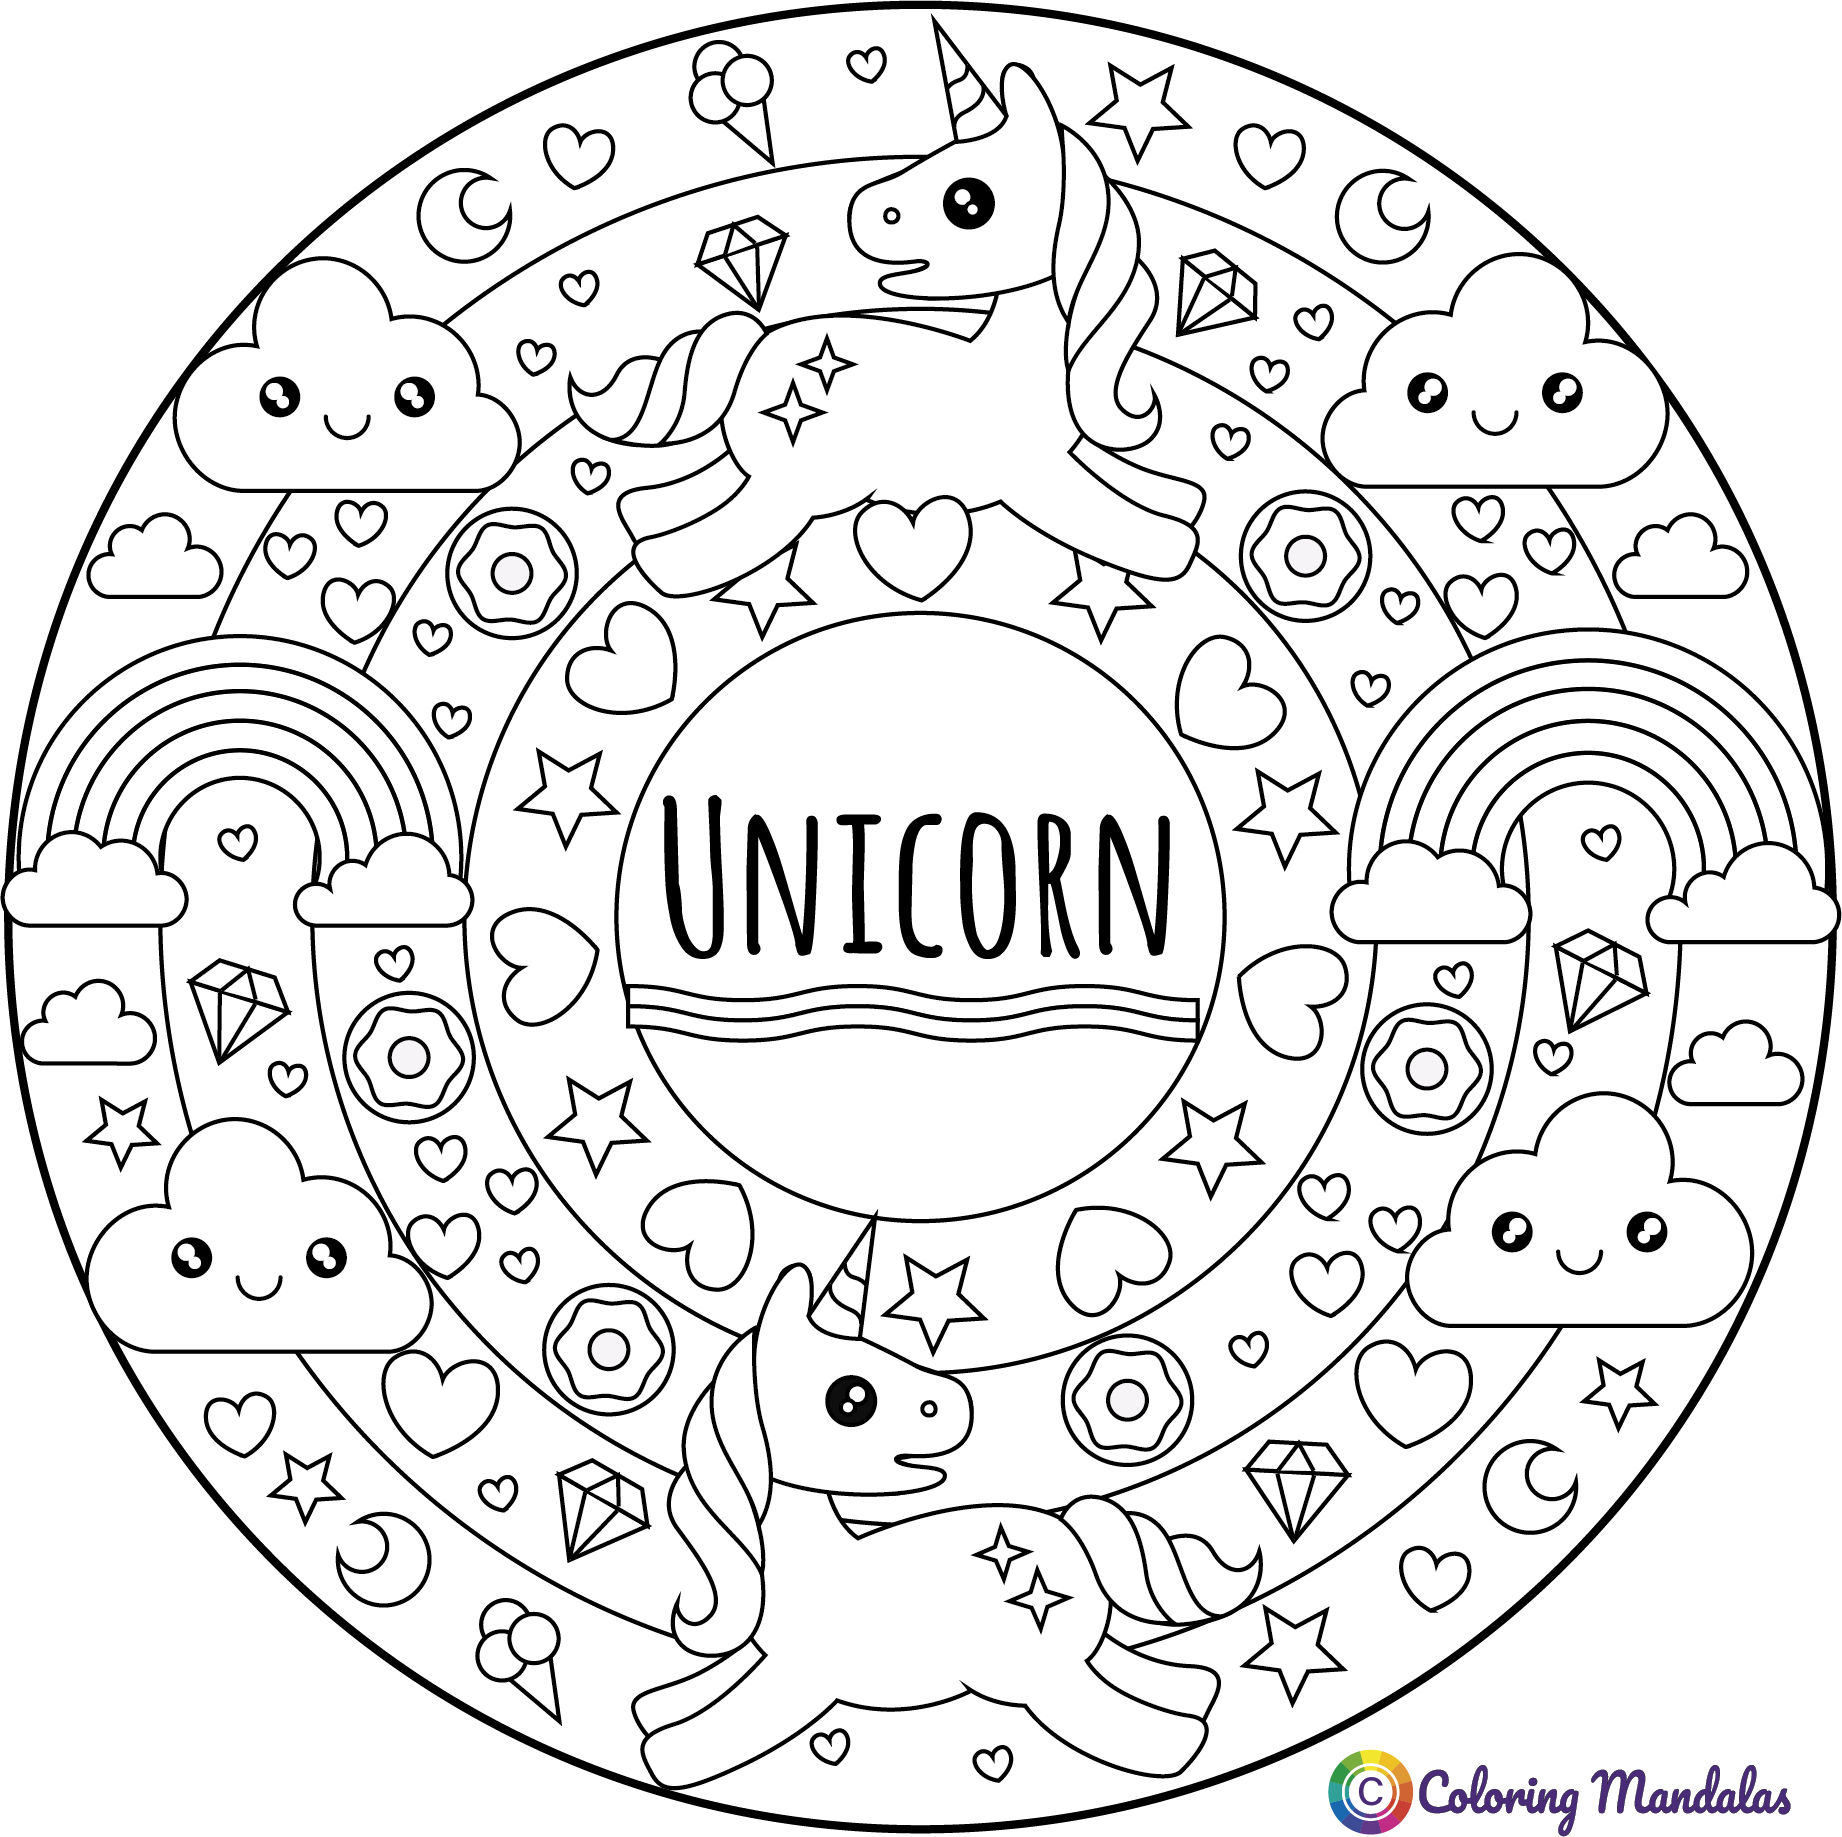 Unicorn Mandala 02 - Coloring Pages for Kids